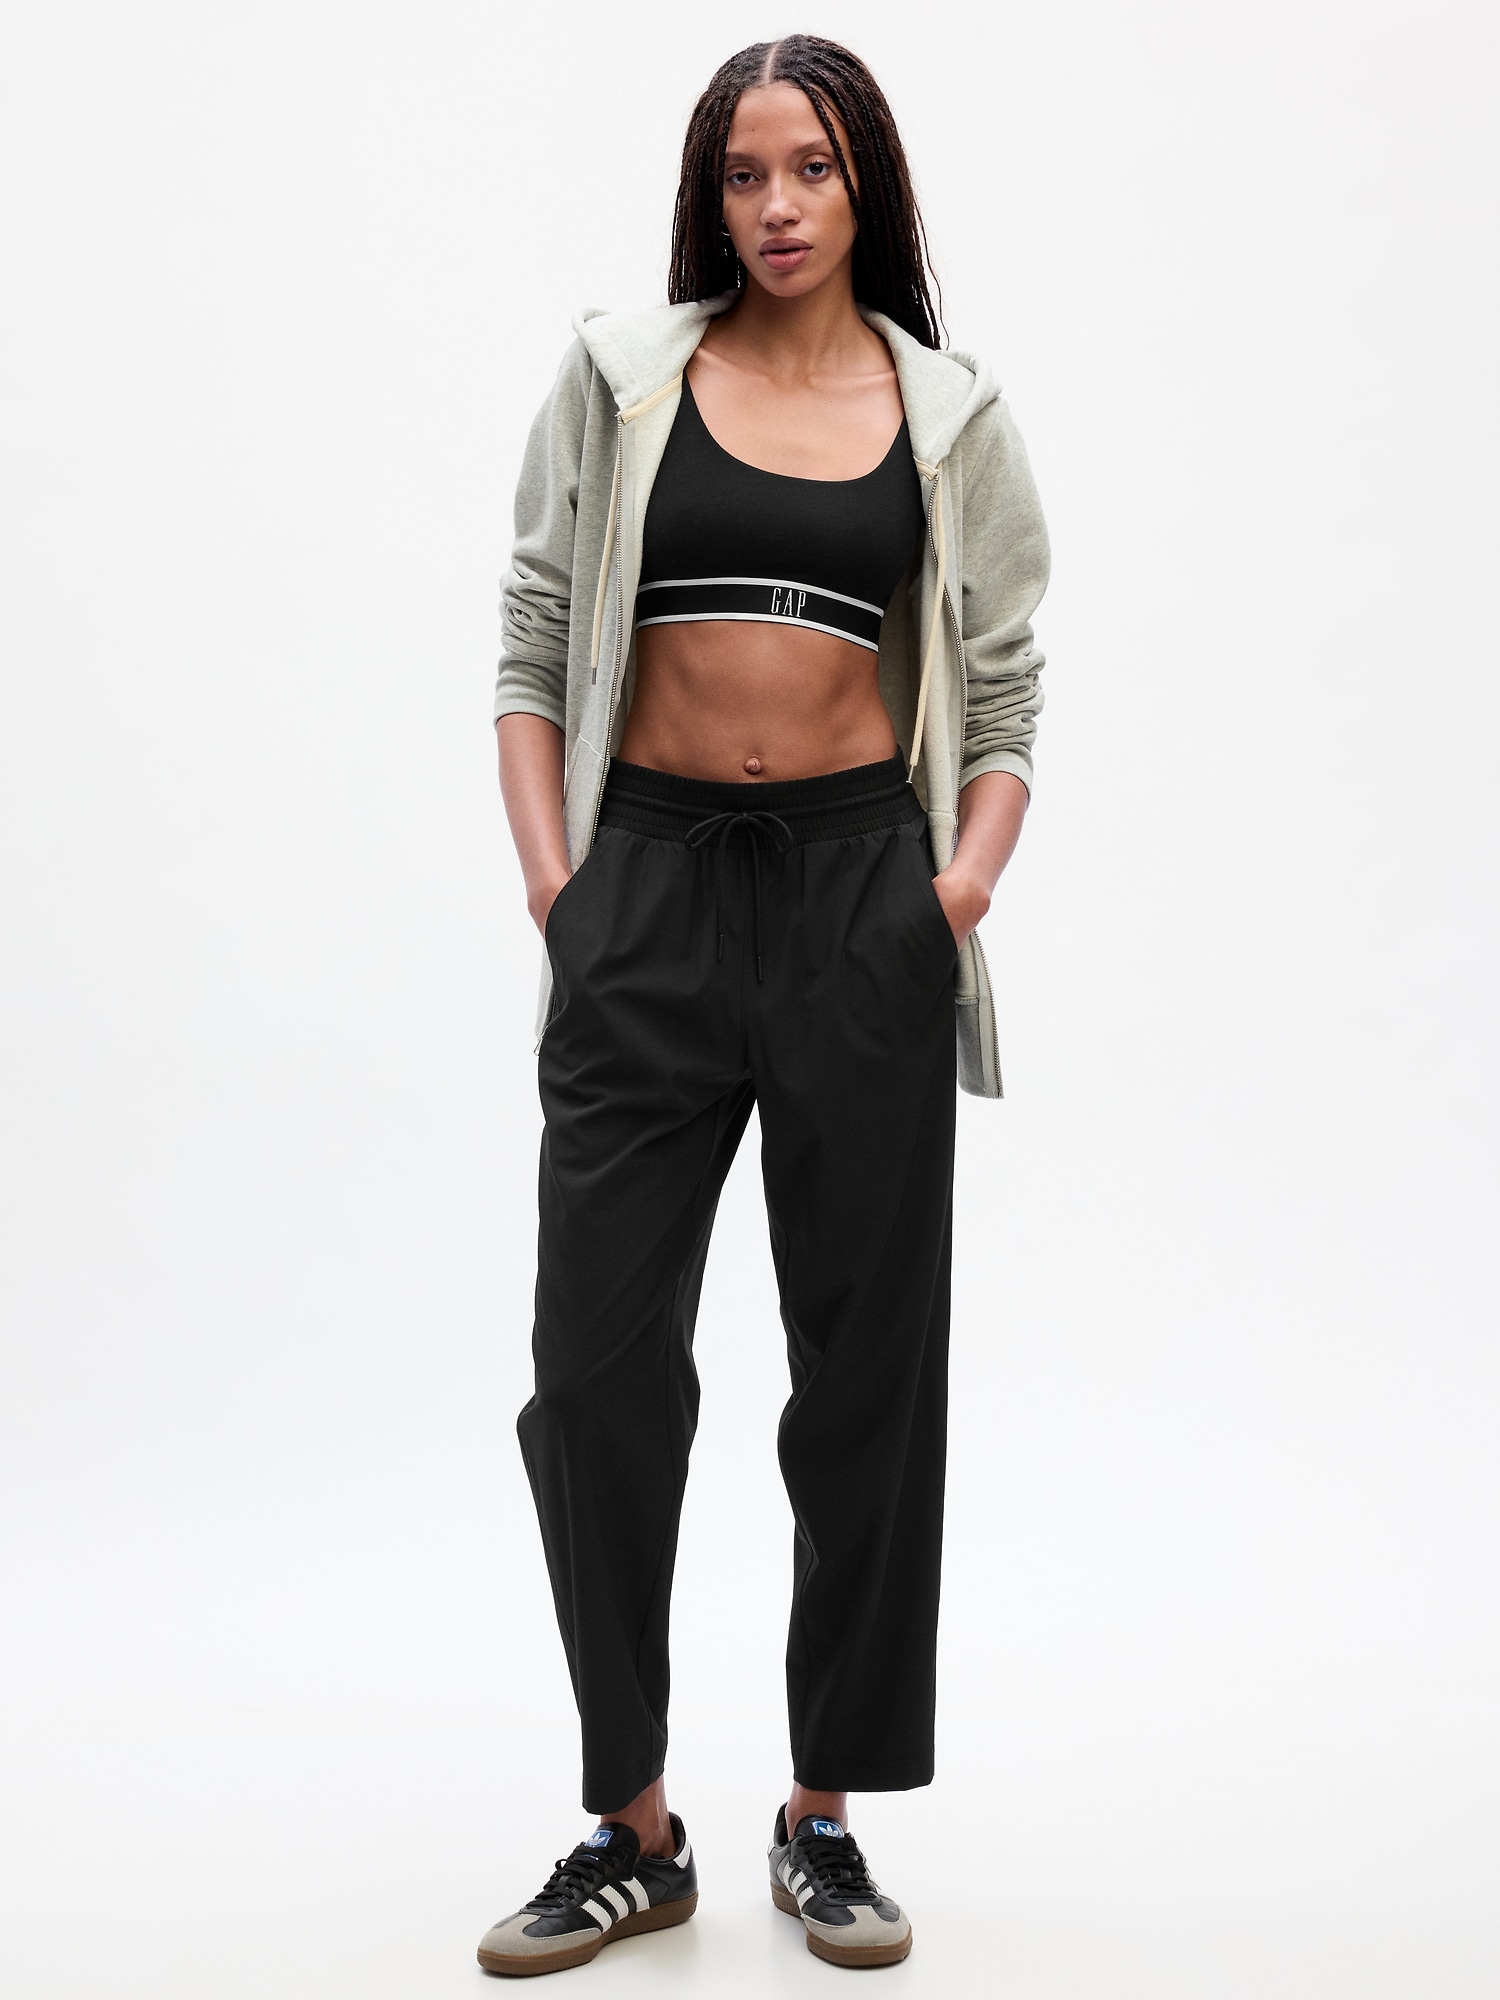 Gap Breathable Athletic Pants for Women